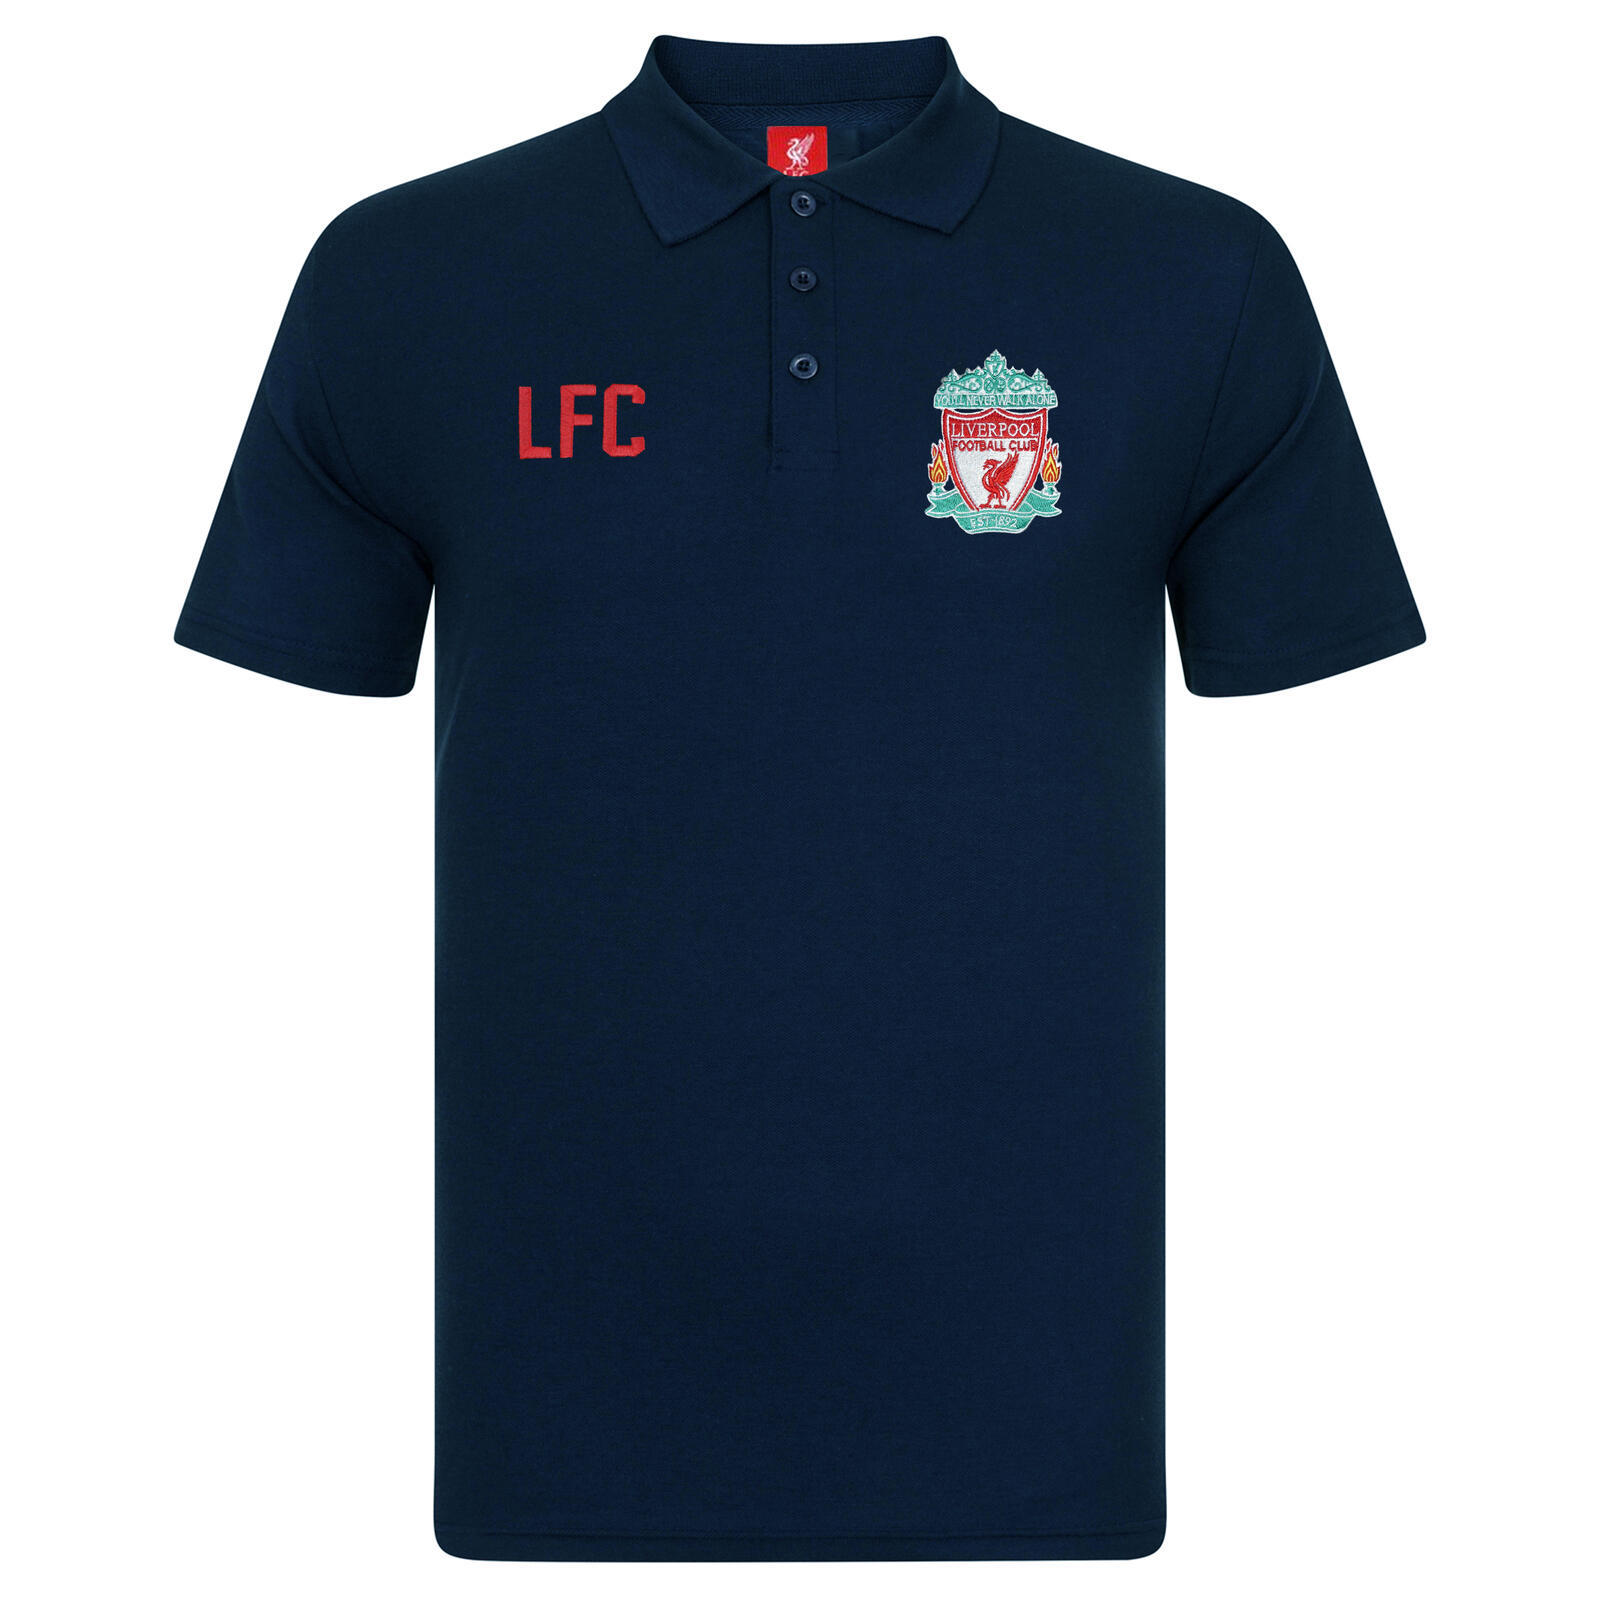 LIVERPOOL FC Liverpool FC Boys Polo Shirt Crest Kids OFFICIAL Football Gift